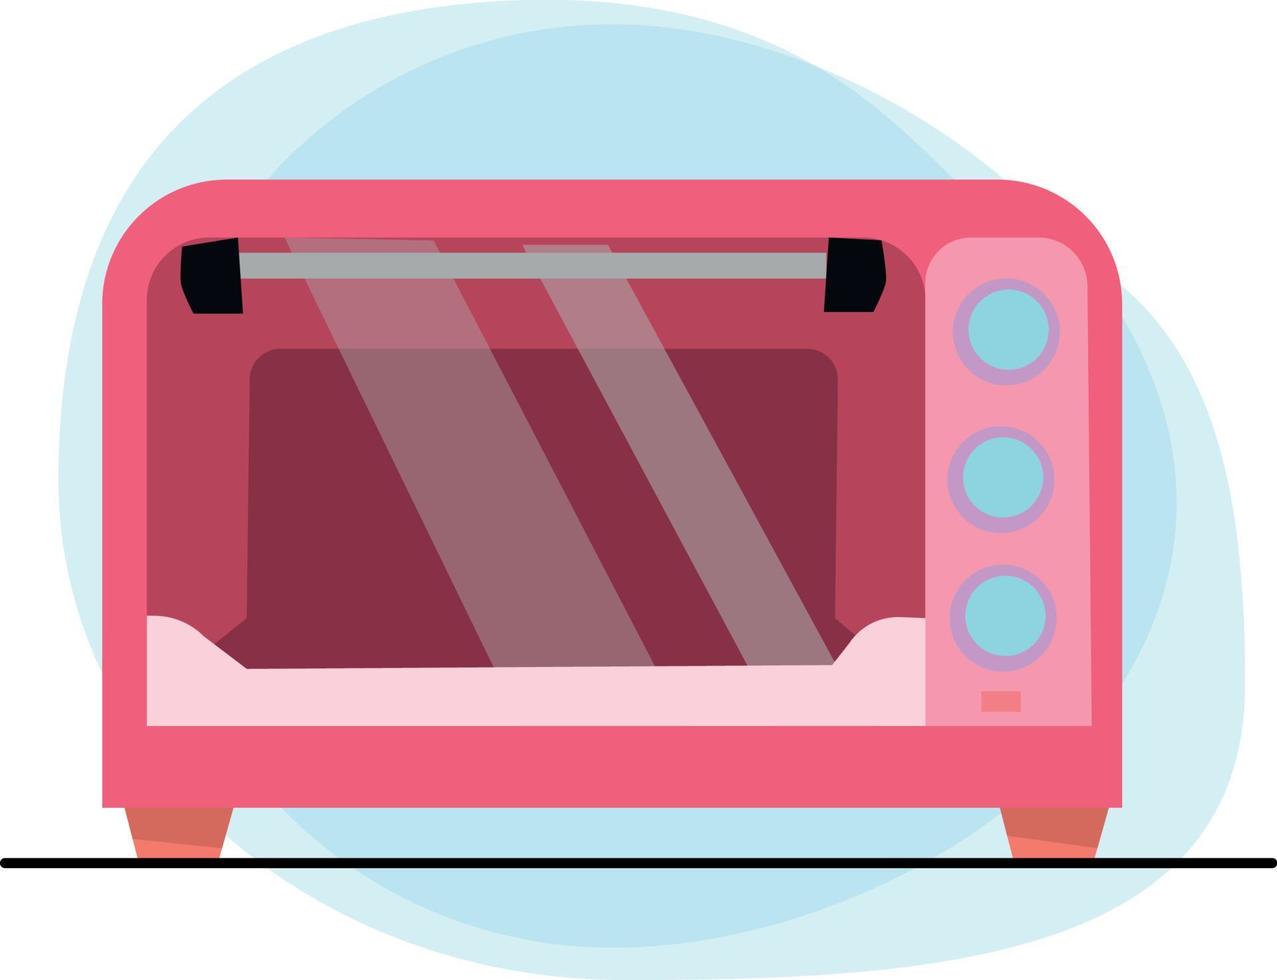 microwave oven vector